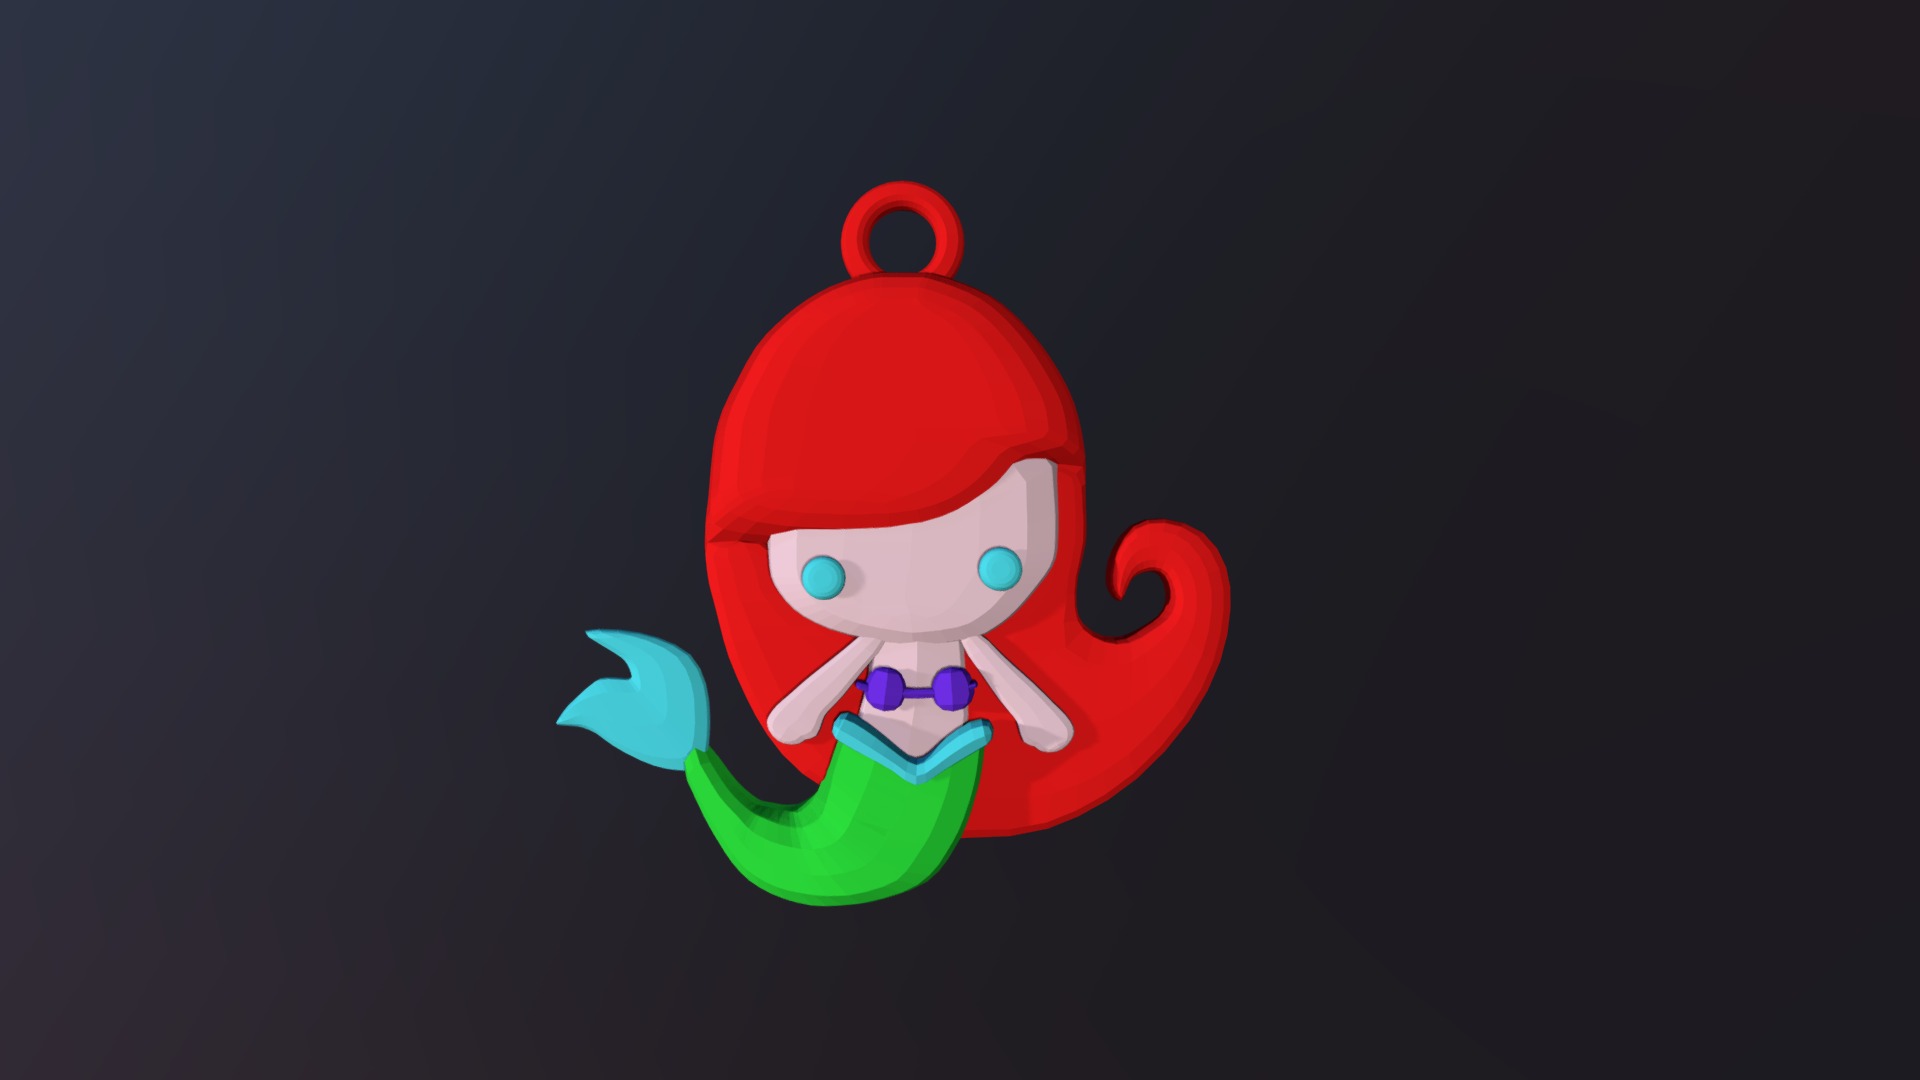 3D model Mermaid Keychain - This is a 3D model of the Mermaid Keychain. The 3D model is about a red and white cartoon character.